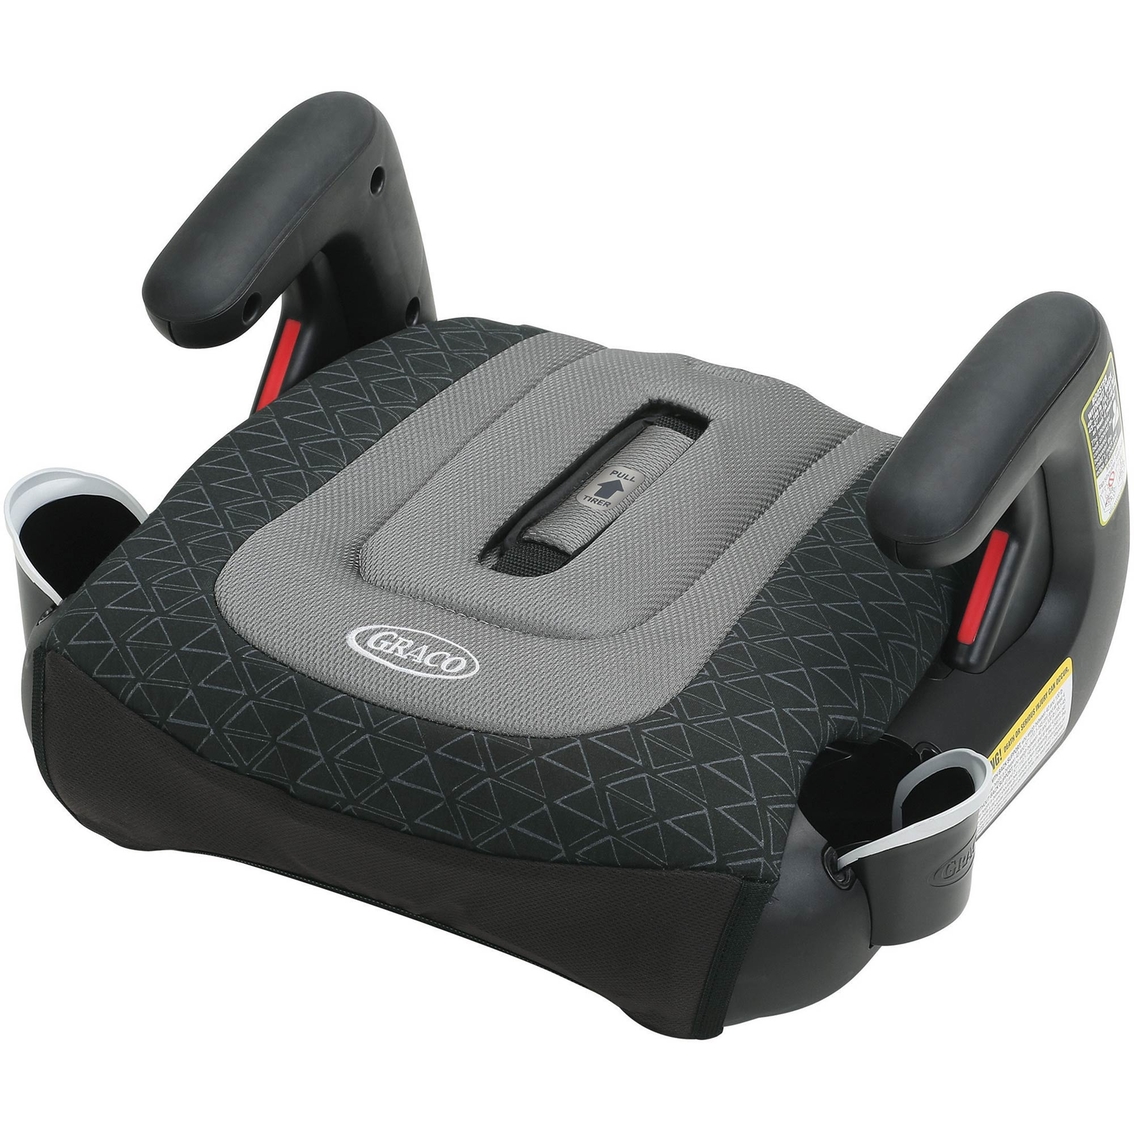 graco turbobooster seat expiration